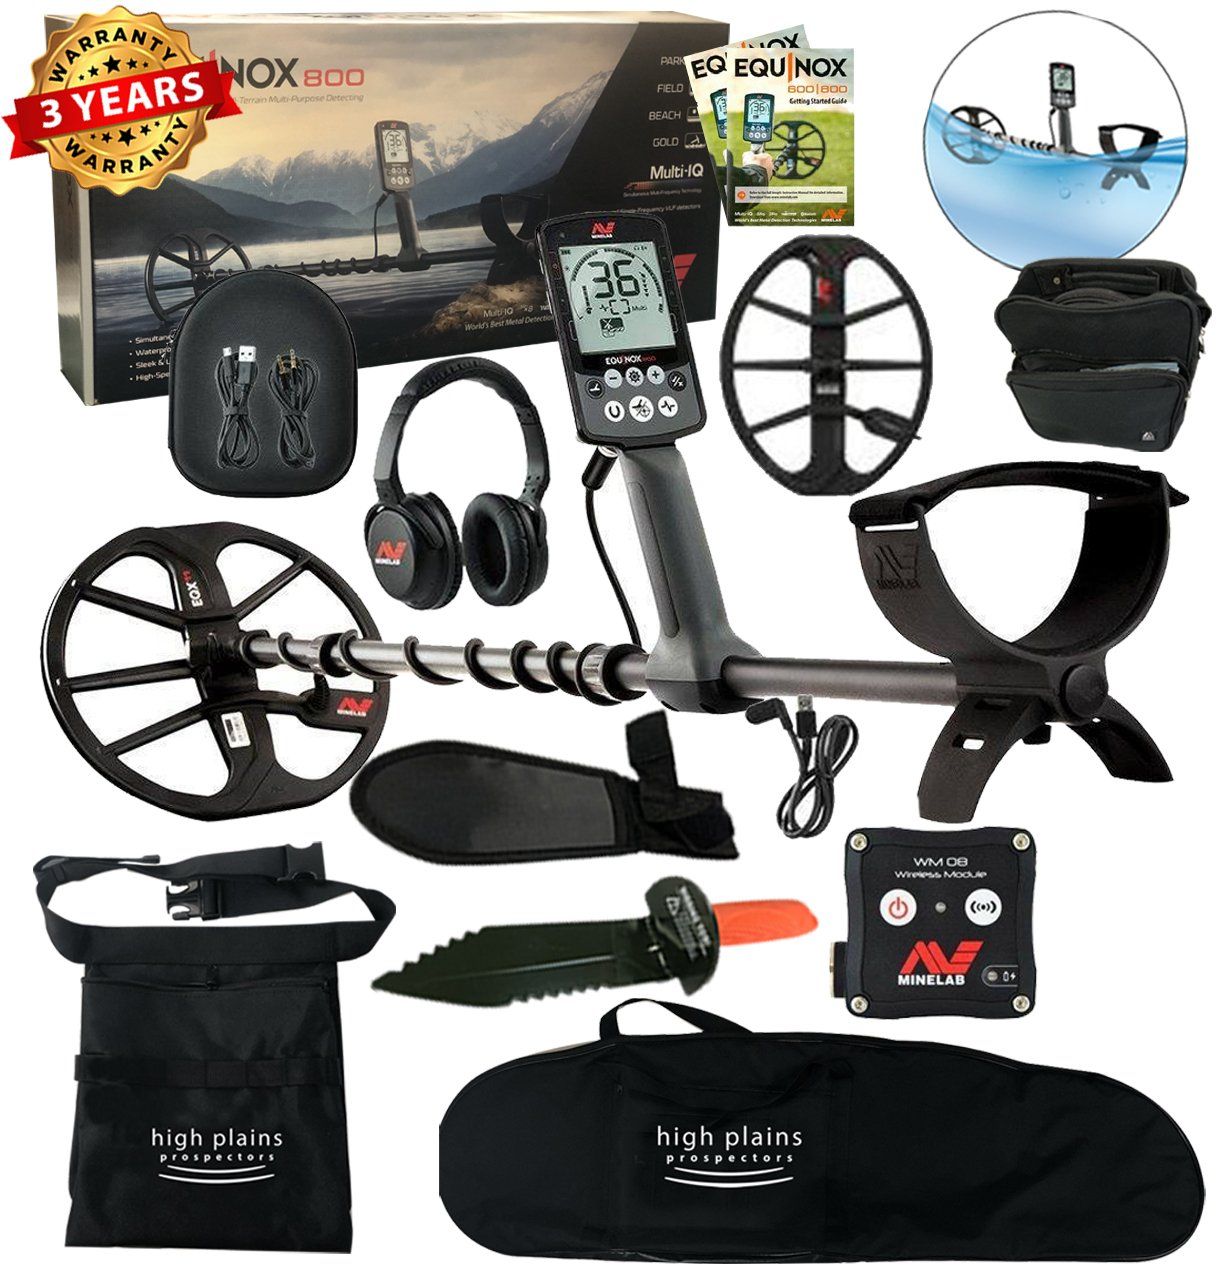 The best bundle deal on Equinox 800 metal detector with free gear